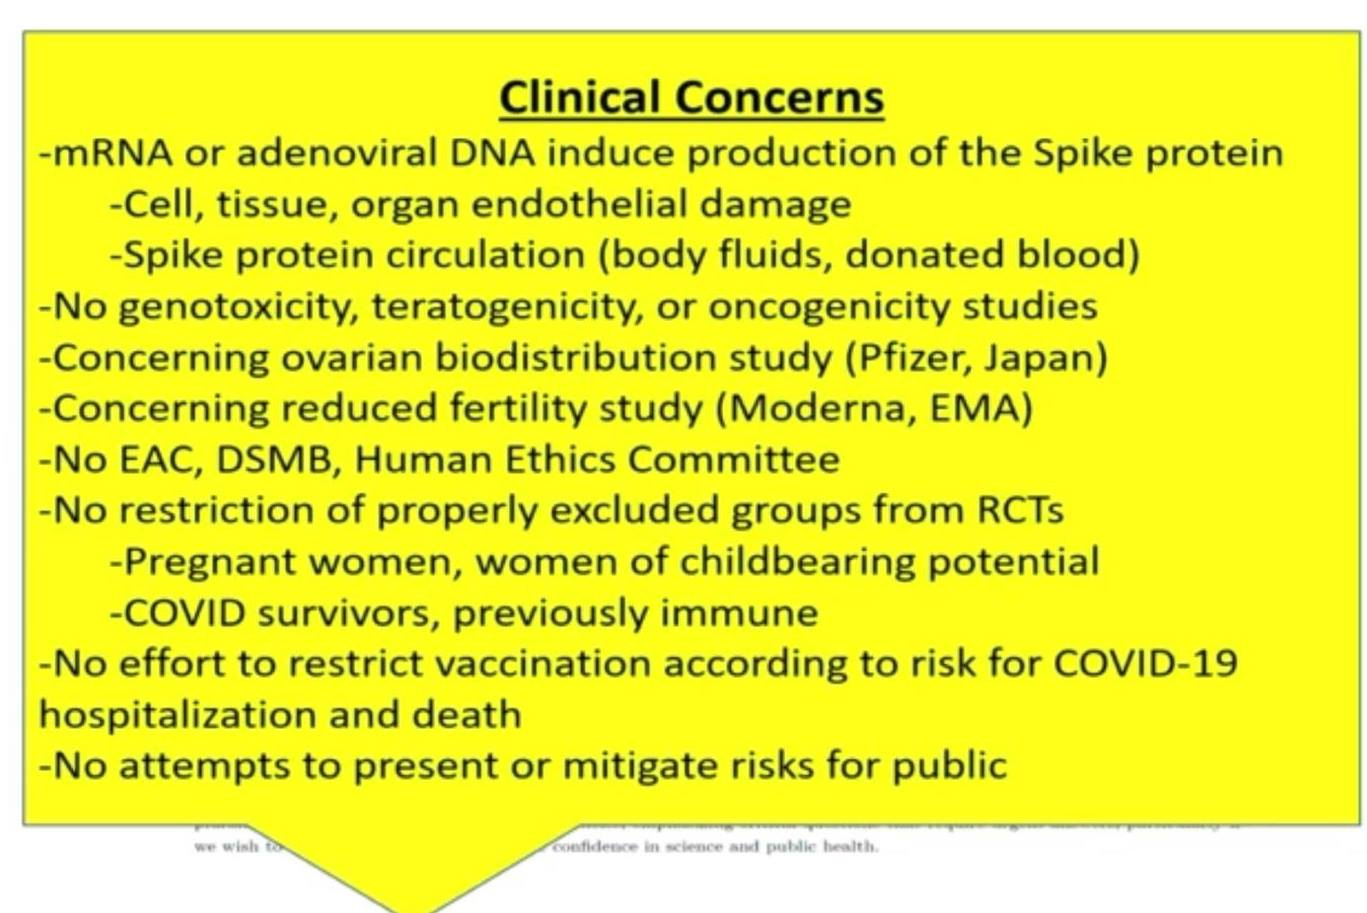 May be an image of text that says 'Clinical Concerns -mRNA or adenoviral DNA induce production of the Spike protein -Cell, tissue, organ endothelial damage -Spike protein circulation (body fluids, donated blood) -No genotoxicity, teratogenicity, or oncogenicity studies -Concerning ovarian biodistribution study (Pfizer, Japan) -Concerning reduced fertility study (Moderna, ΕΜΑ) -No EAC, DSMB, Human Ethics Committee -No restriction of properly excluded groups from RCTs -Pregnant women, women of childbearing potential COVID survivors, previously immune -No effort to restrict vaccination according to risk for COVID-19 hospitalization and death -No attempts to present or mitigate risks for public confidence clence and publie health'